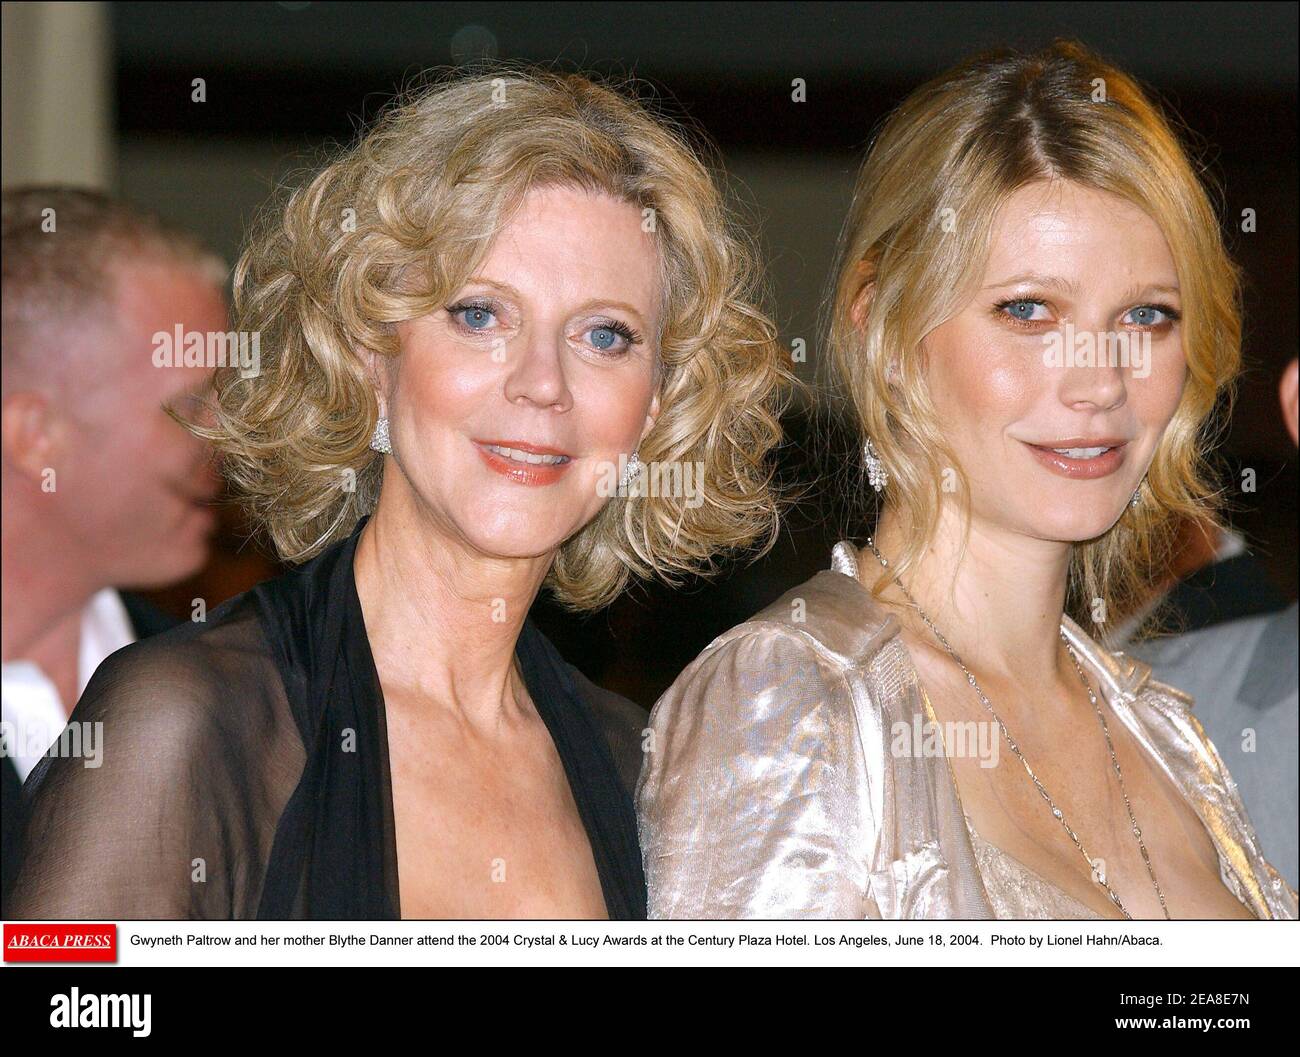 Paltrow and her mother Blythe Danner attend the 2004 Crystal